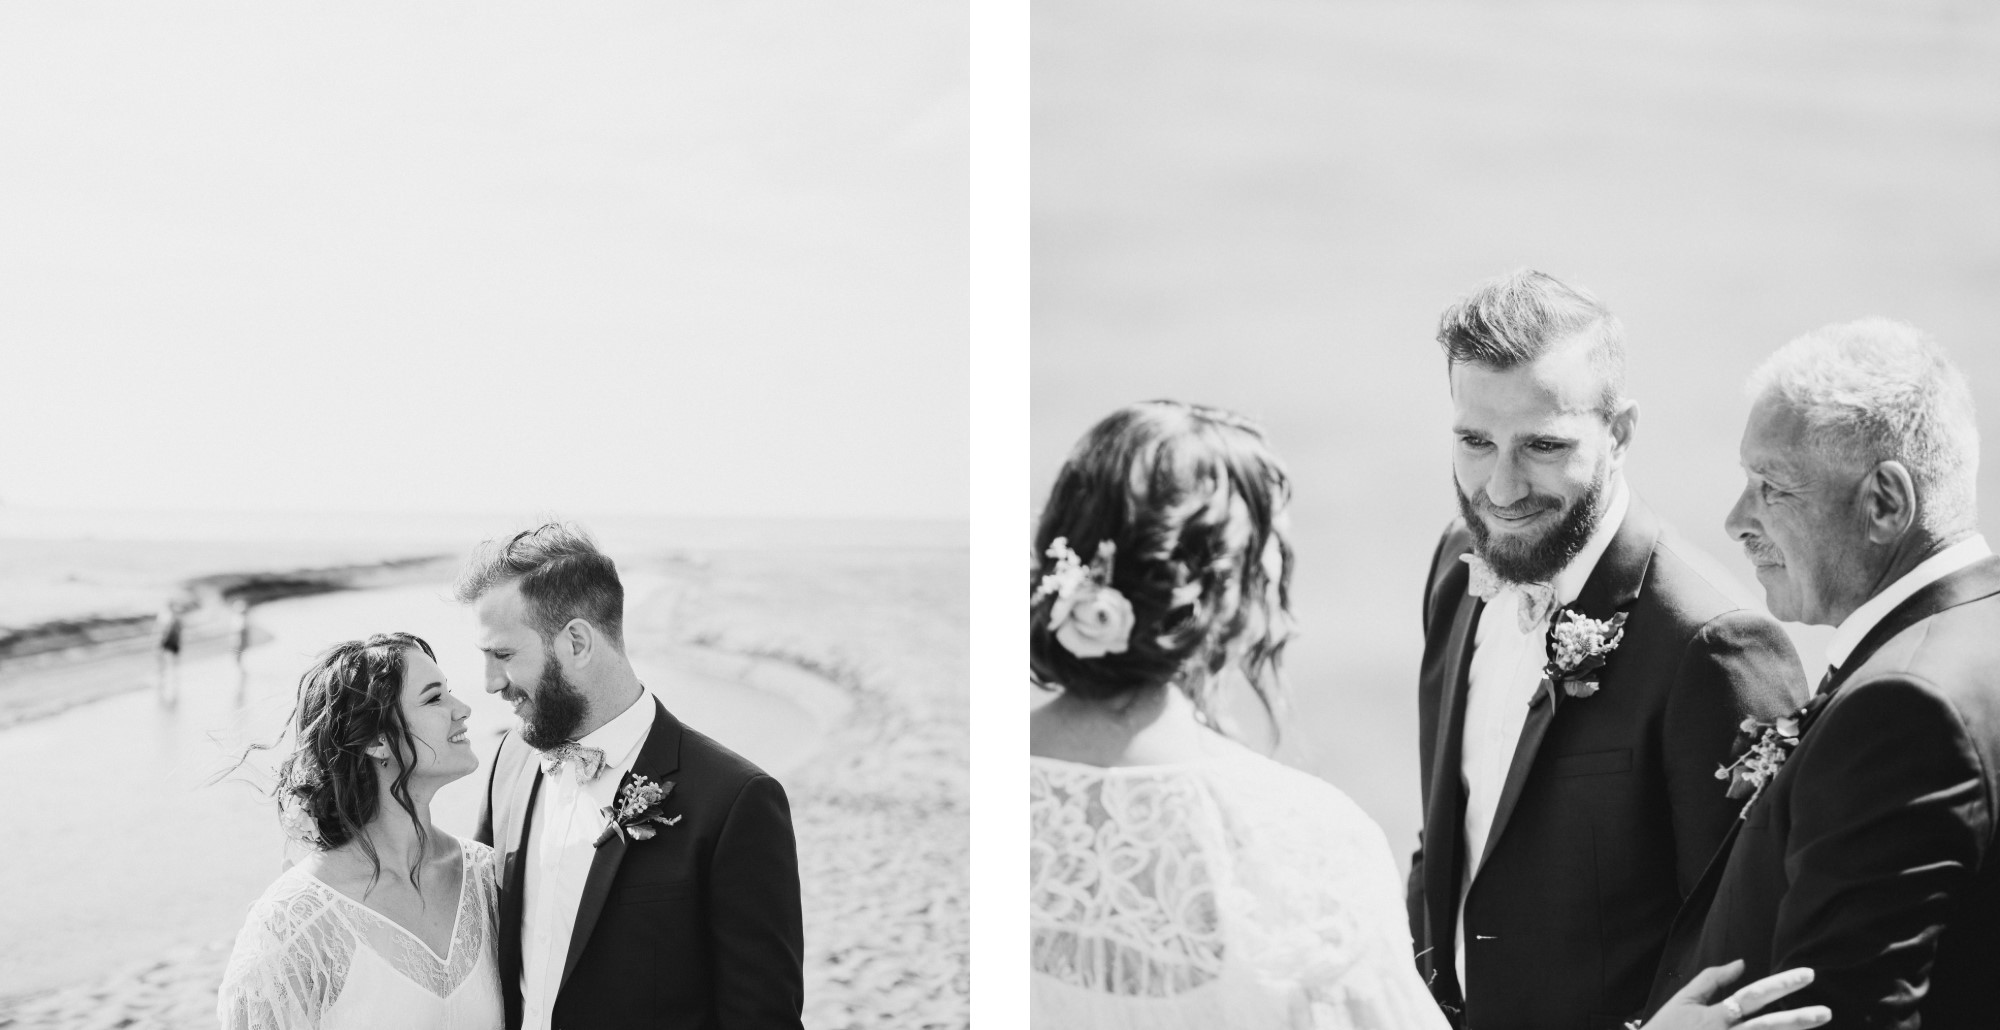 Left, newlyweds on the beach. Right, groom smiling at bride at altar